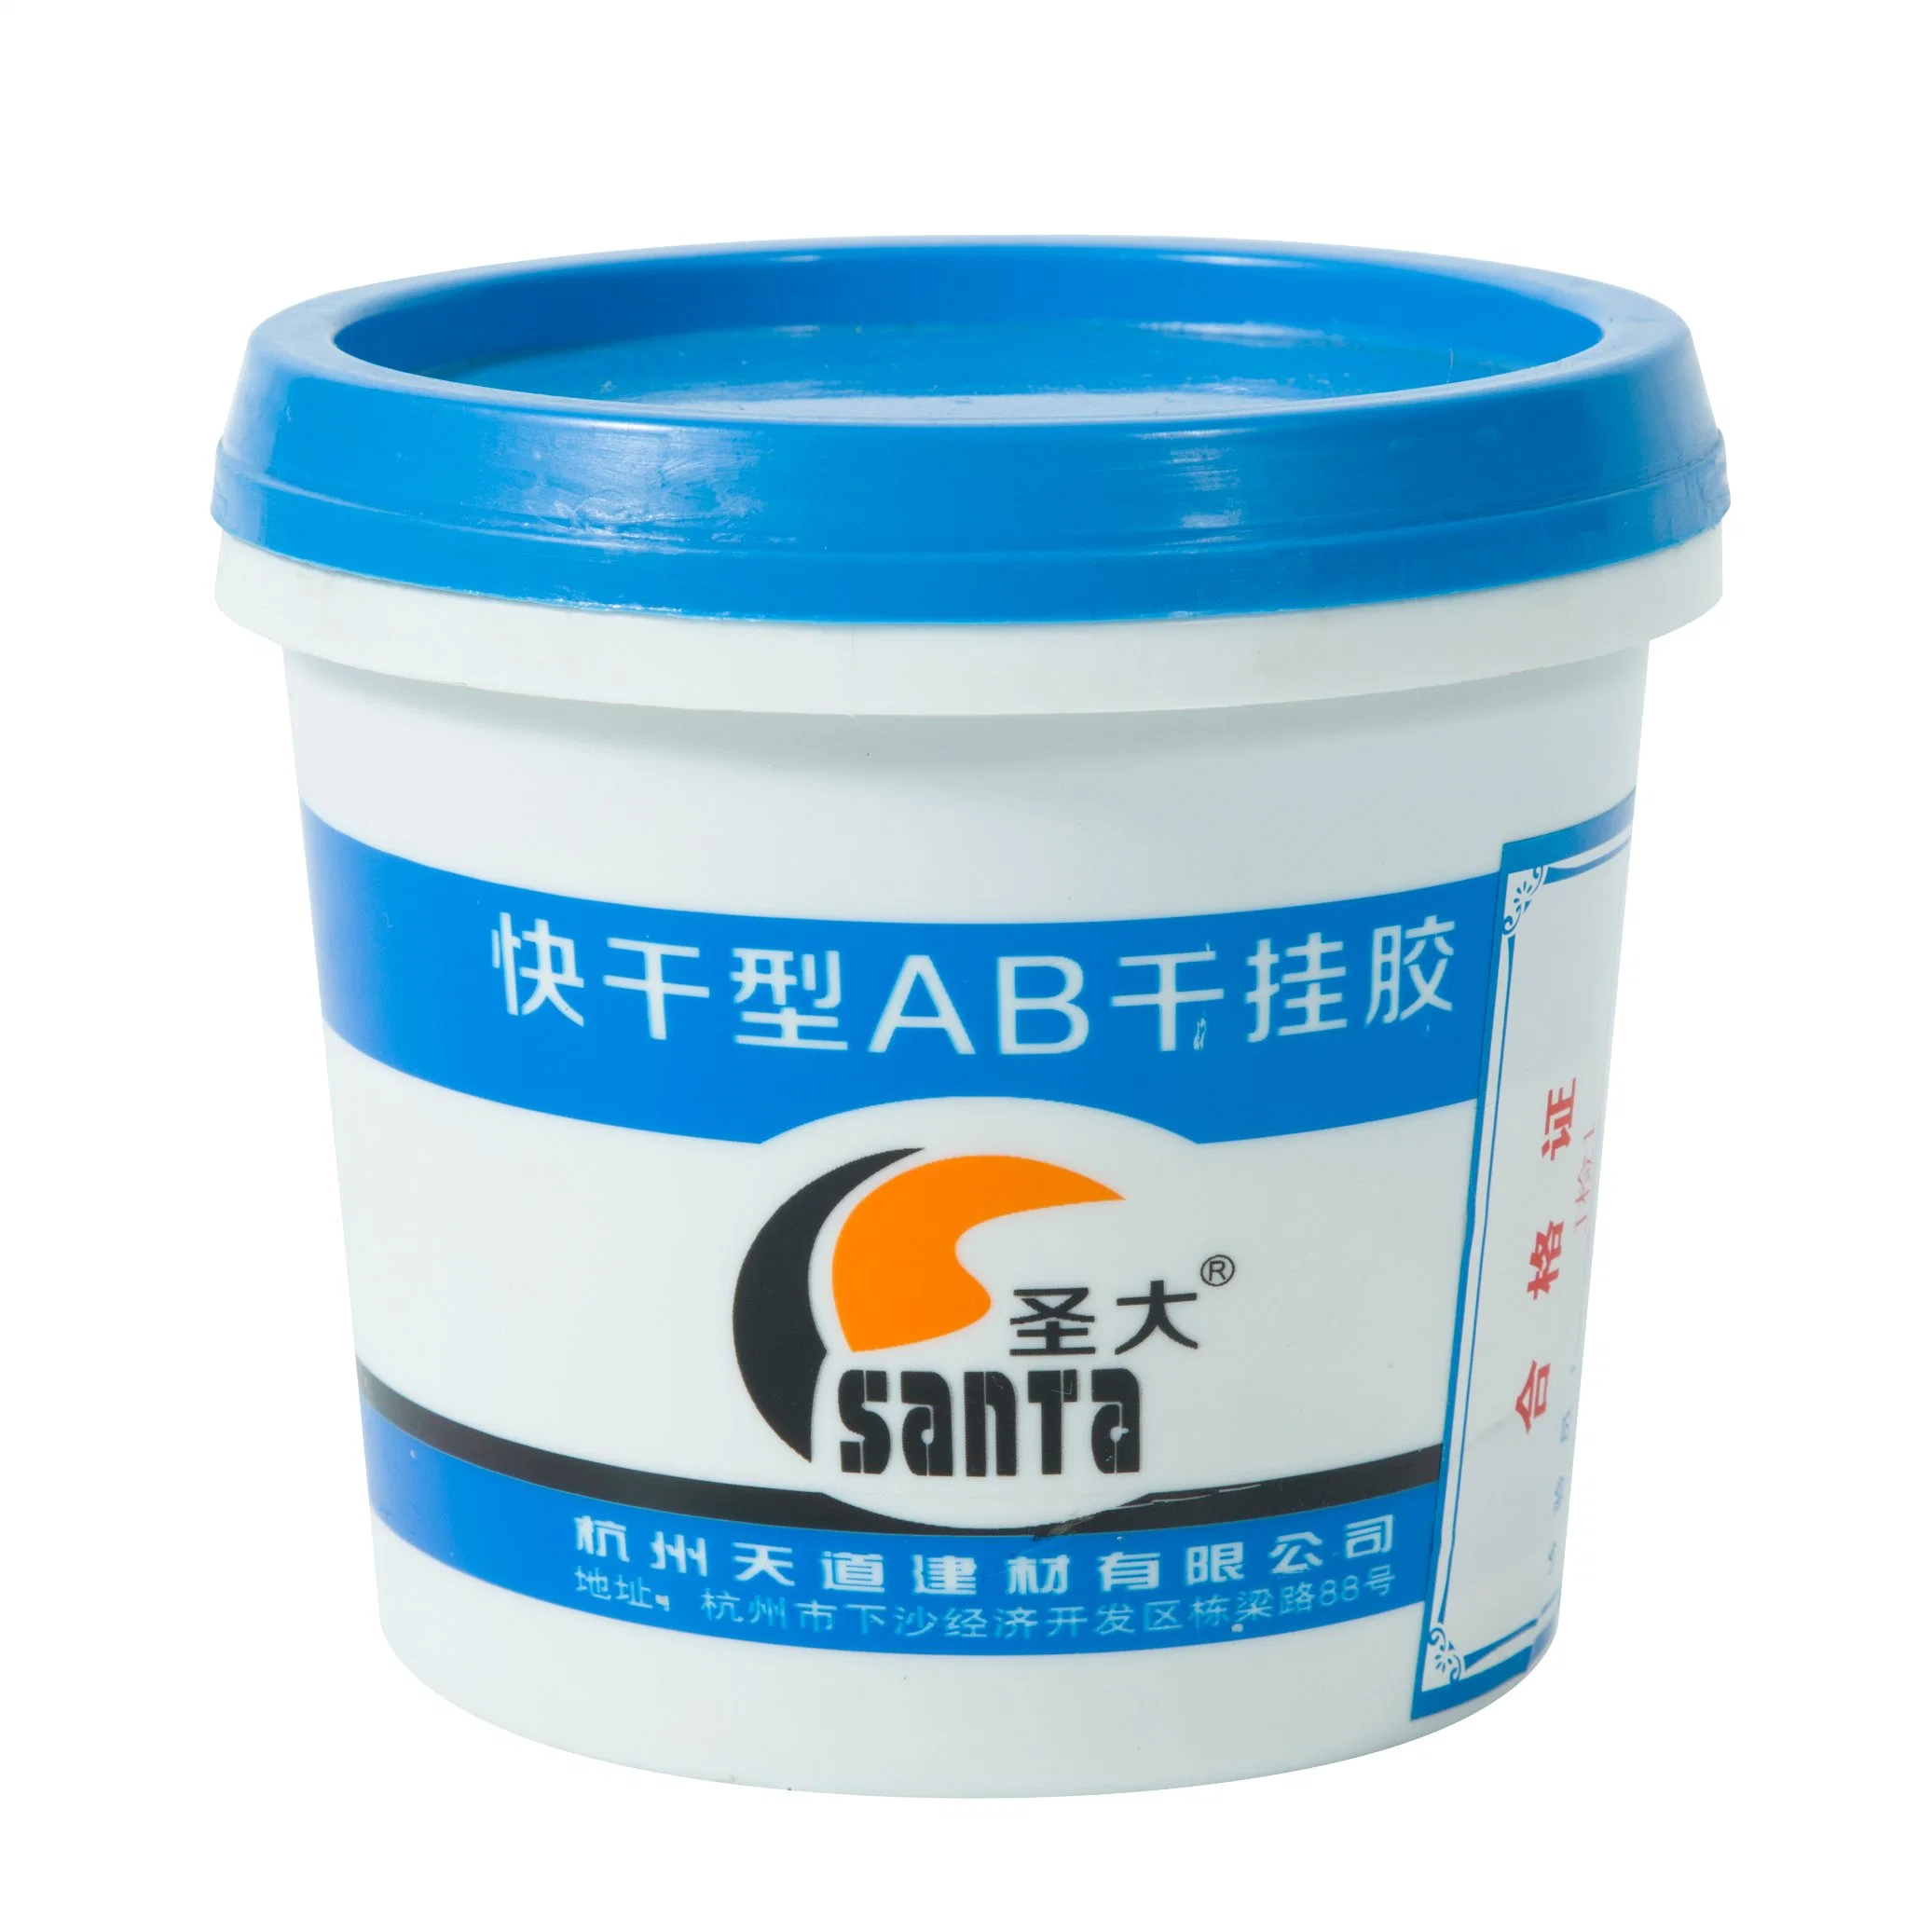 Contact Adhesive High Performance Ab Epoxy Structural Adhesive